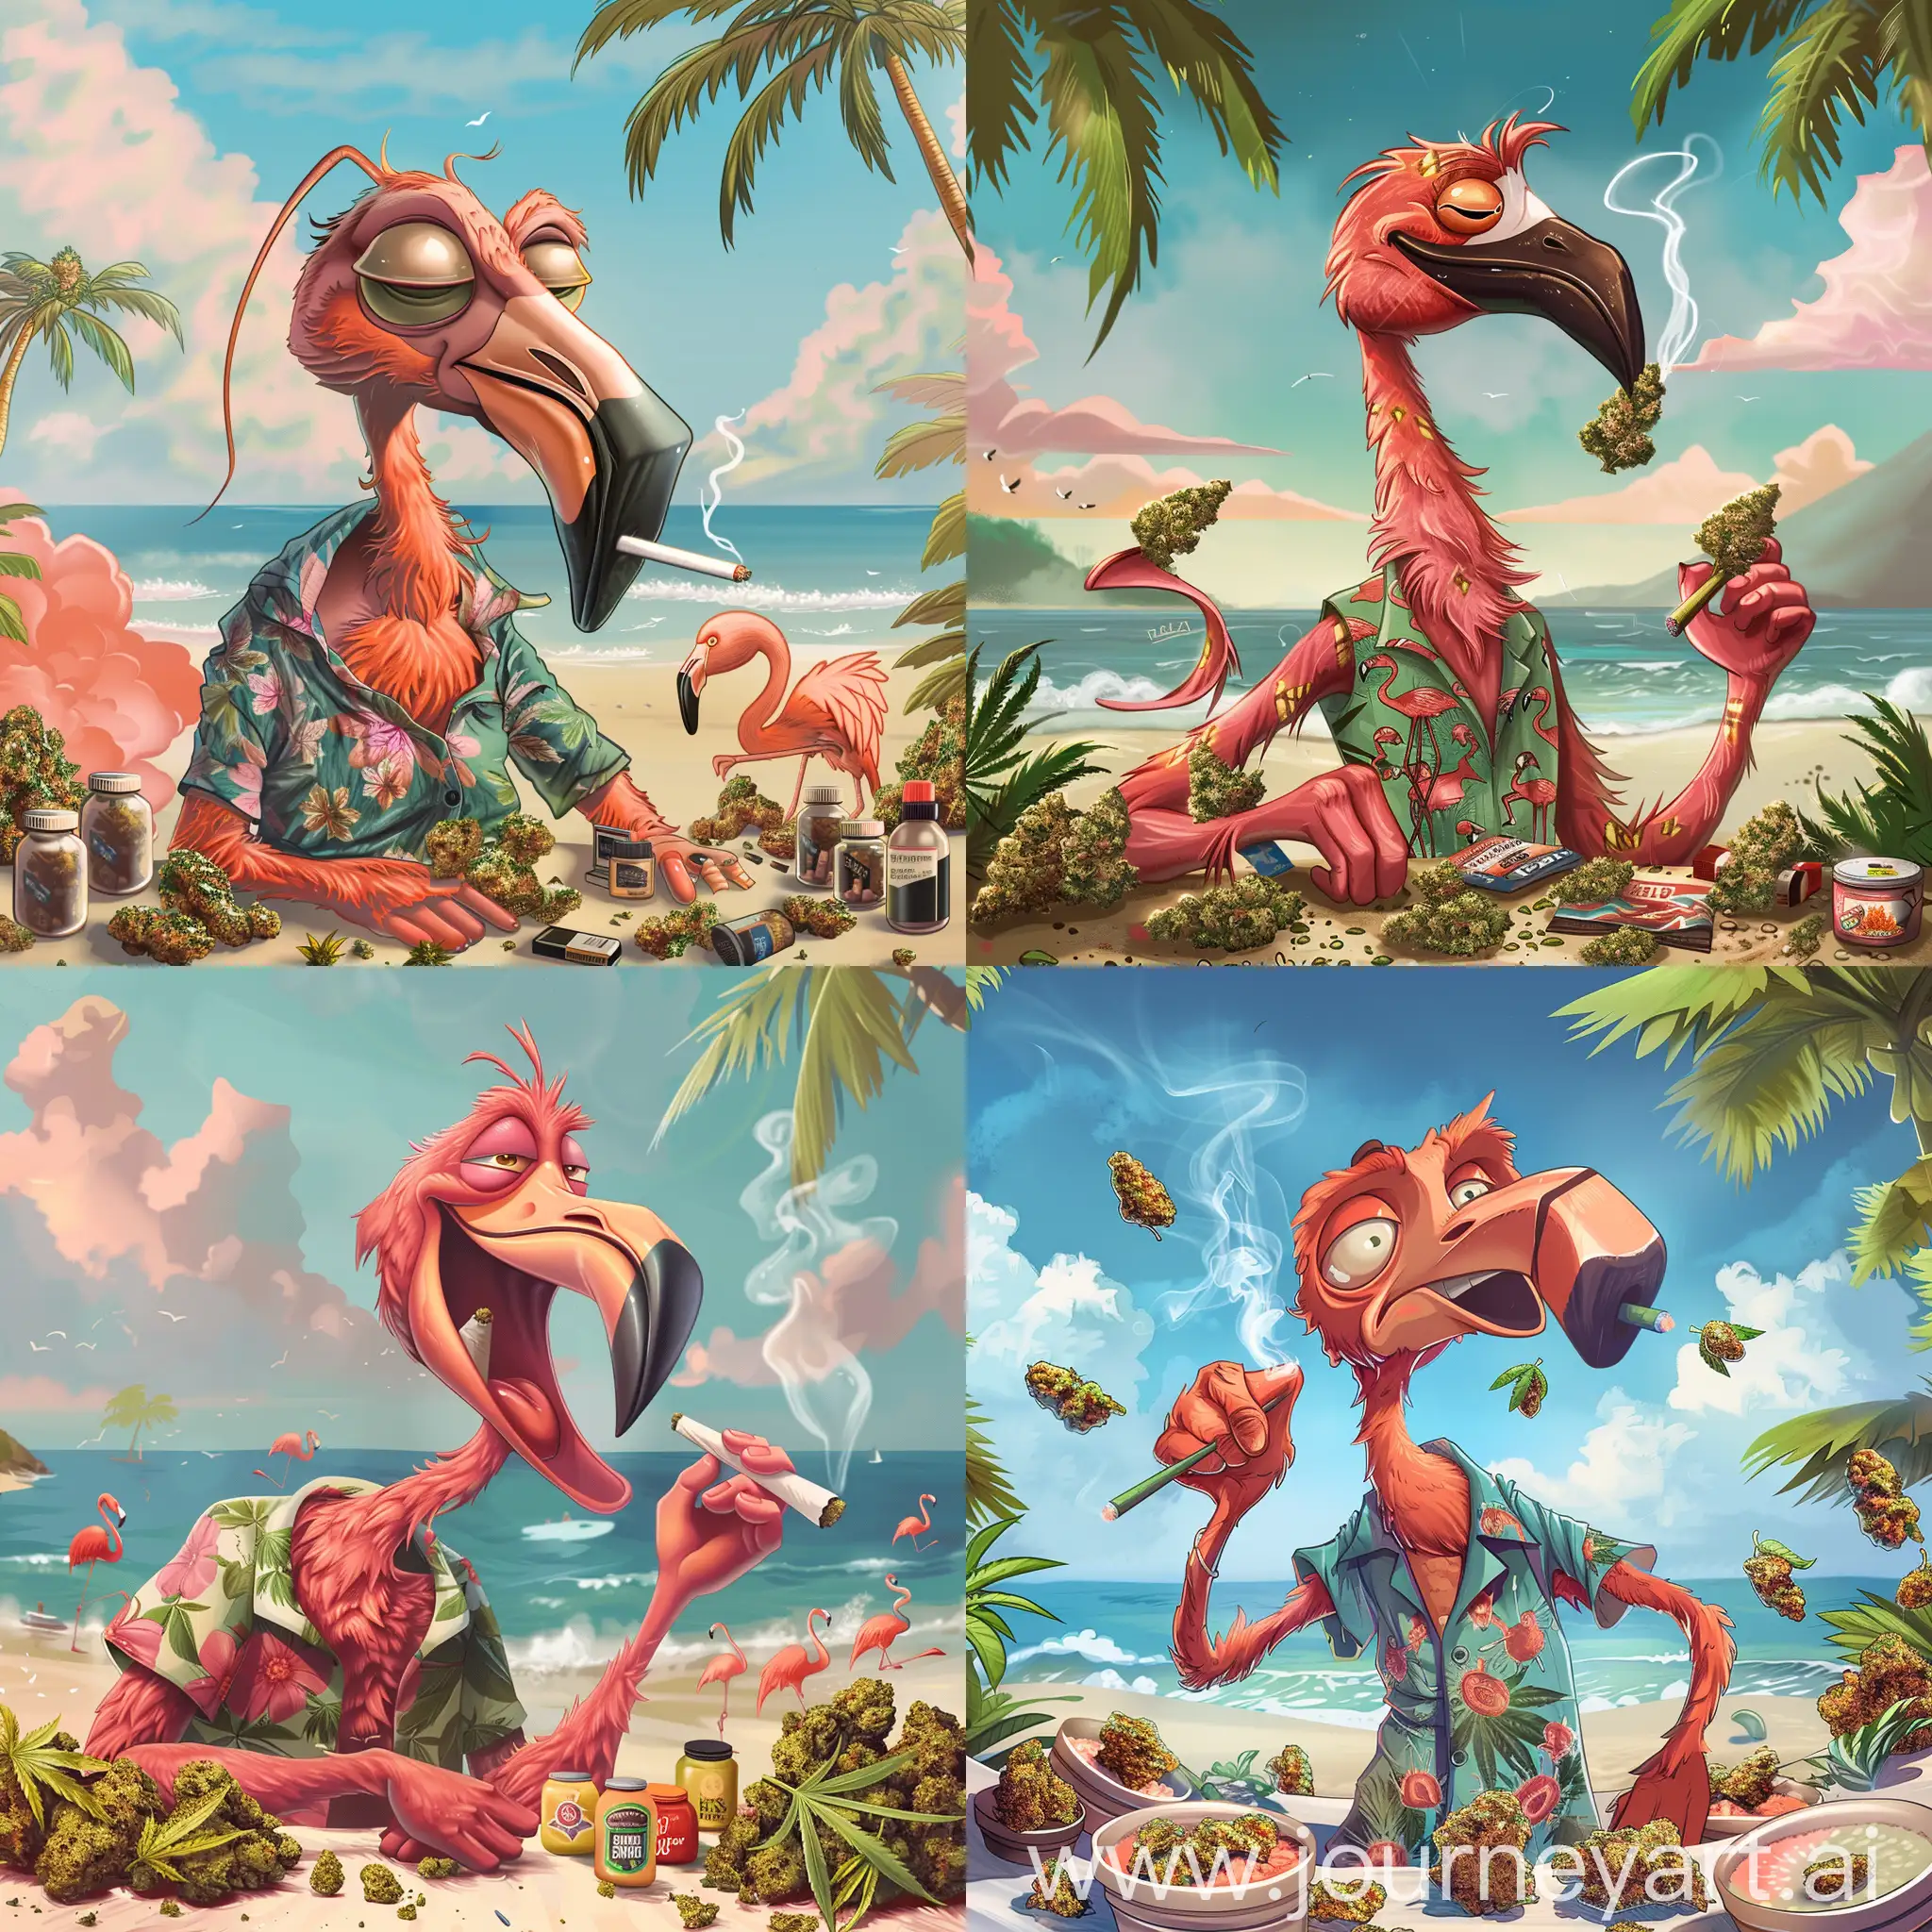 An animated flamingo who owns a cannabis store on the beach surrounded with cannabis and cannabis accessories. The flamingo is wearing a beach shirt and is smoking a joint with a happy look on his face